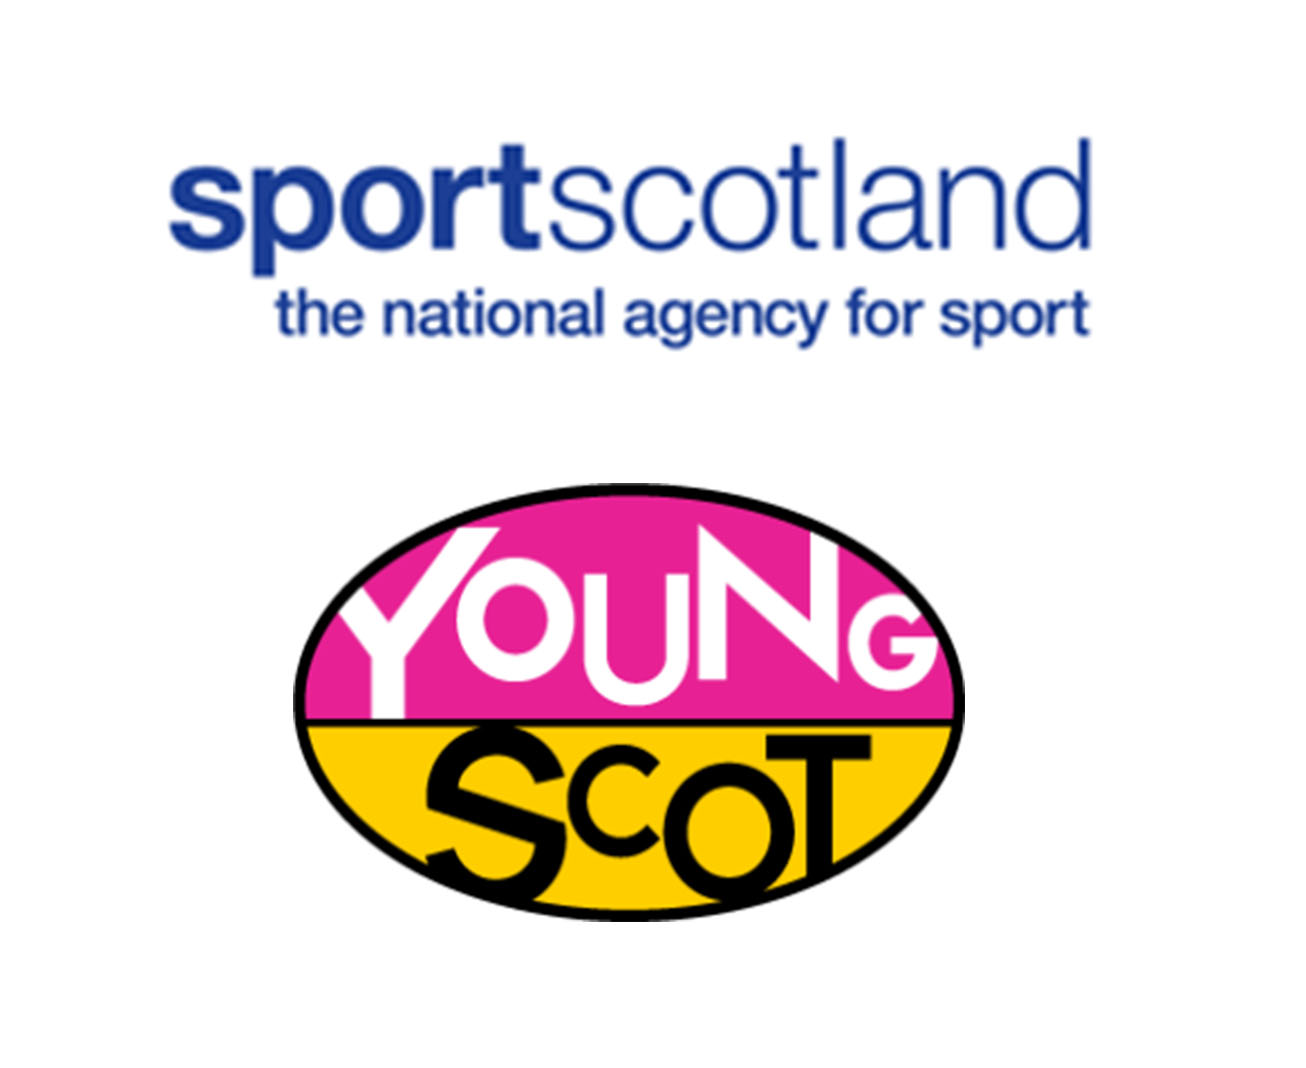 sportscotland Searching for Inspirational Young People to Speak Up for Sport